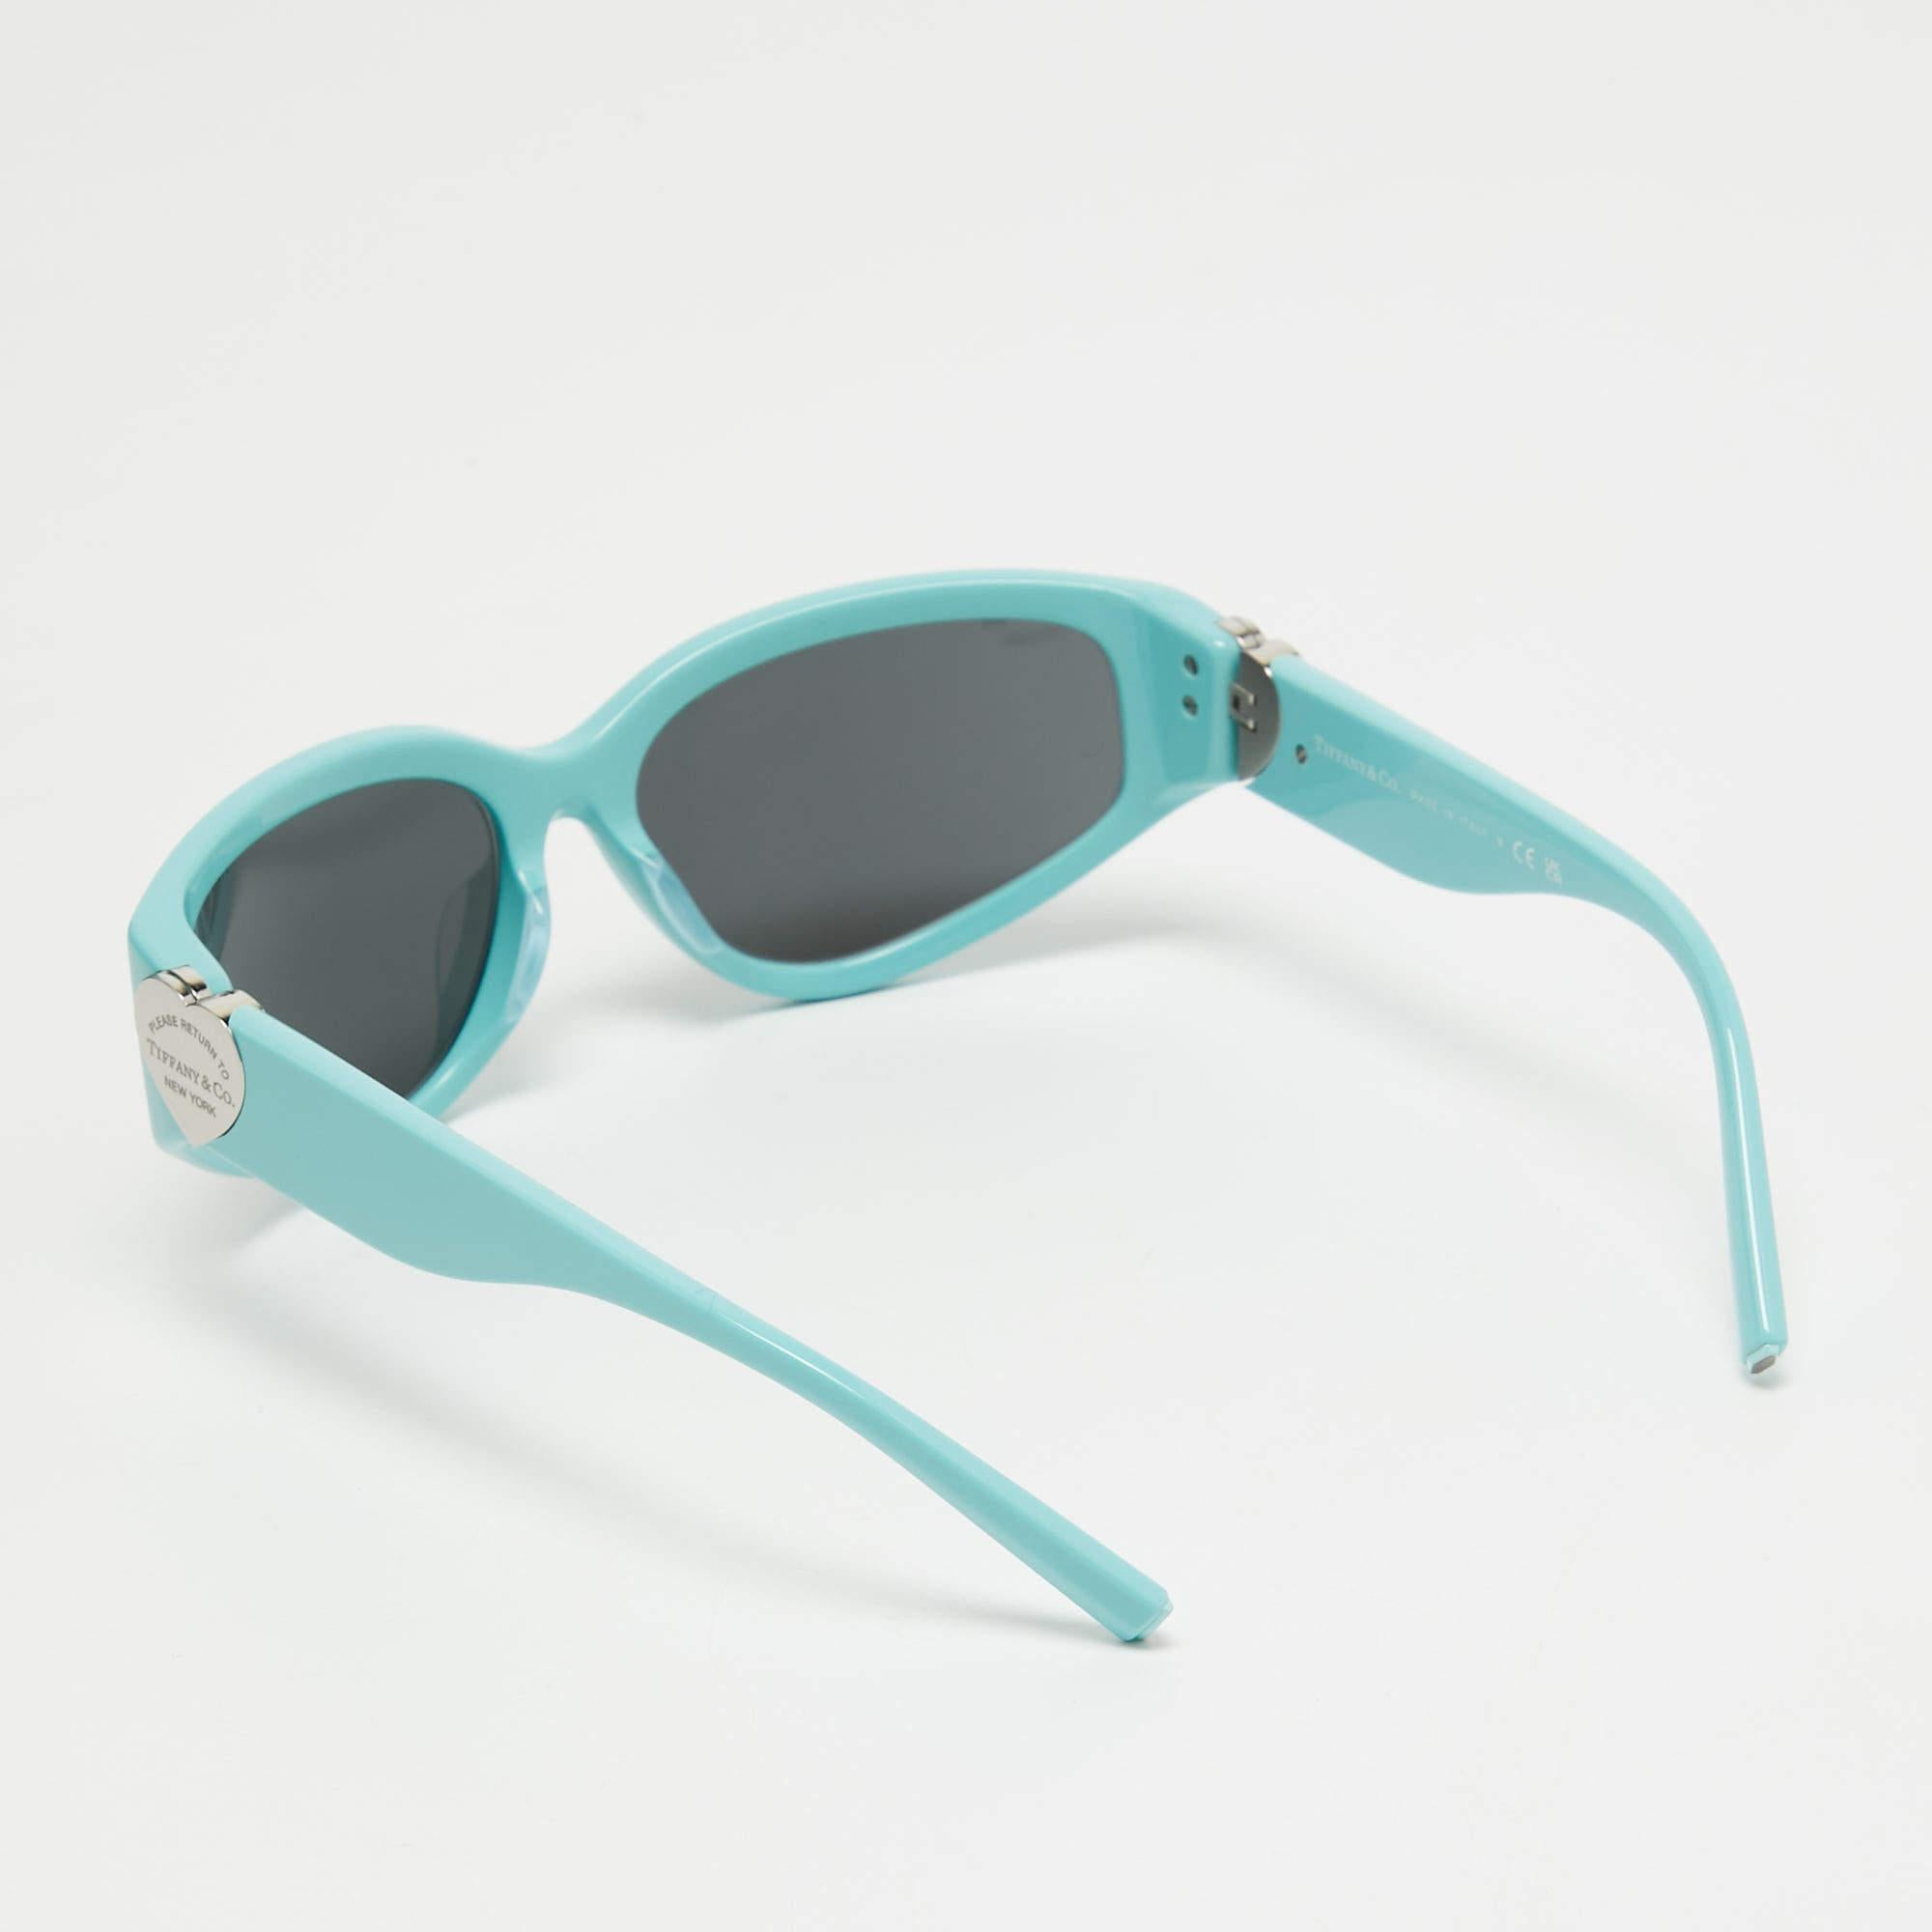 A statement pair of sunglasses from Tiffany & Co. will surely make a prized buy. Featuring a trendy frame and lenses meant to protect your eyes, the sunglasses are ideal for all-day wear.

